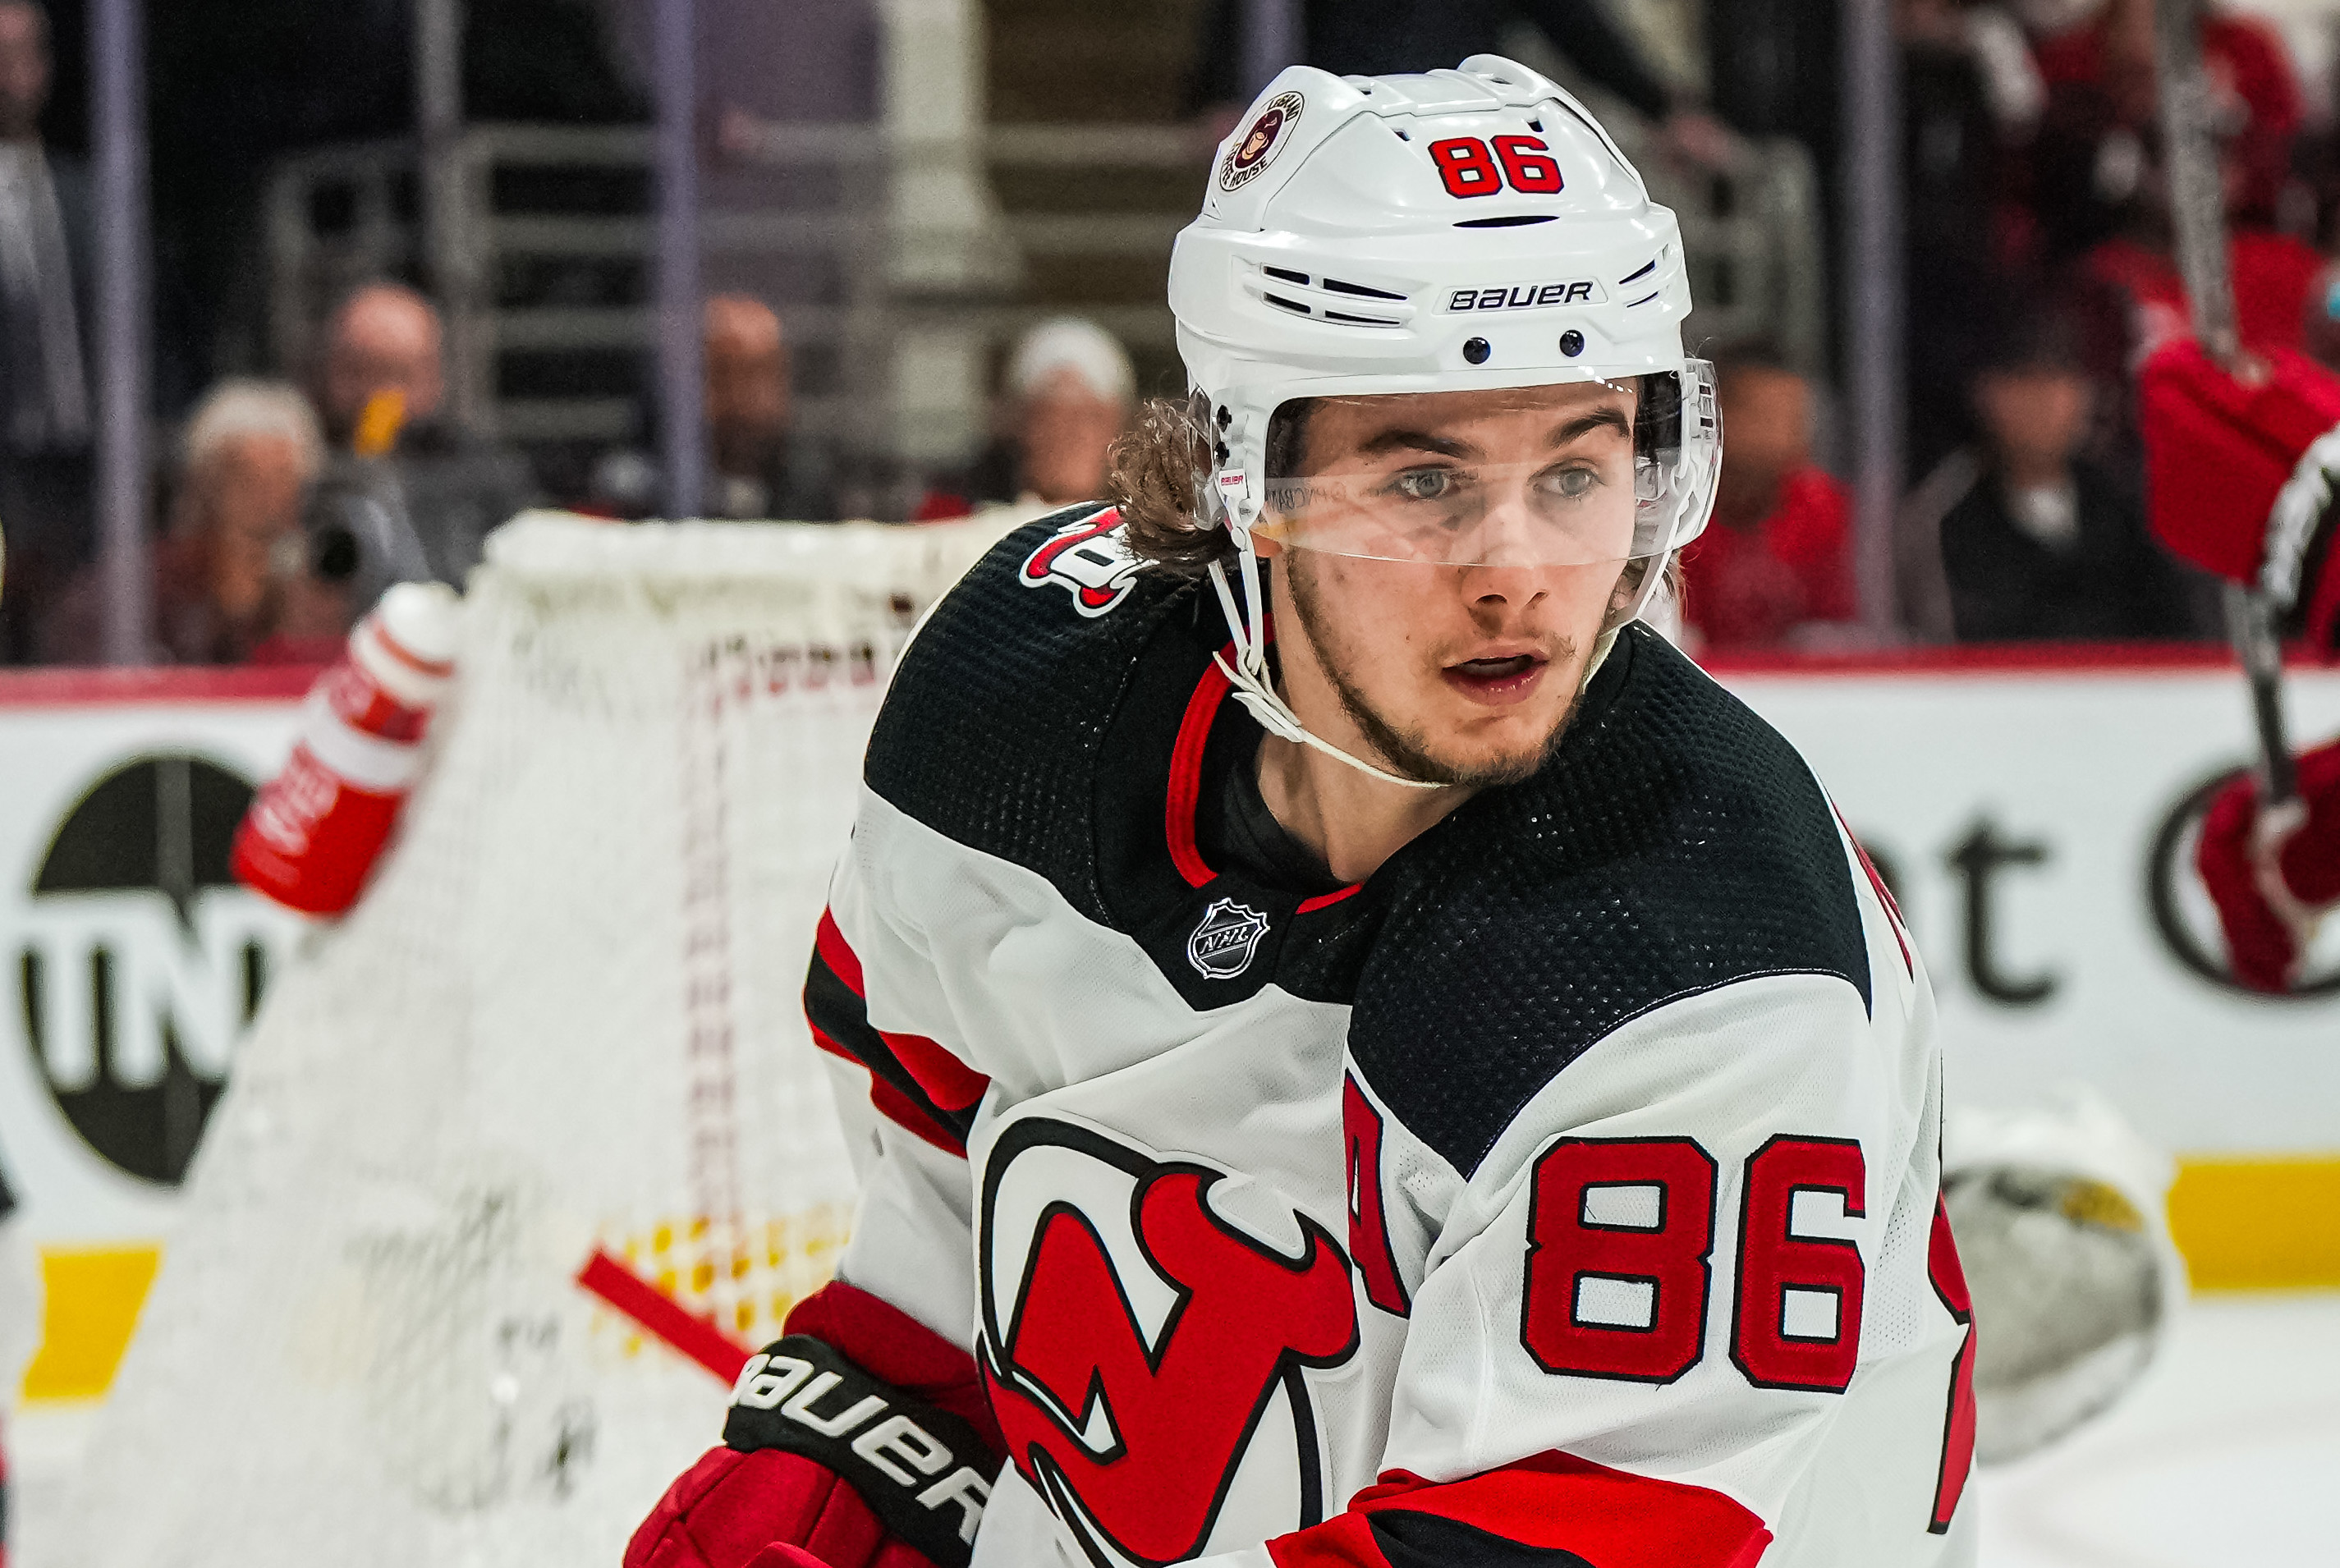 Game Preview #4: New Jersey Devils @ New York Islanders - All